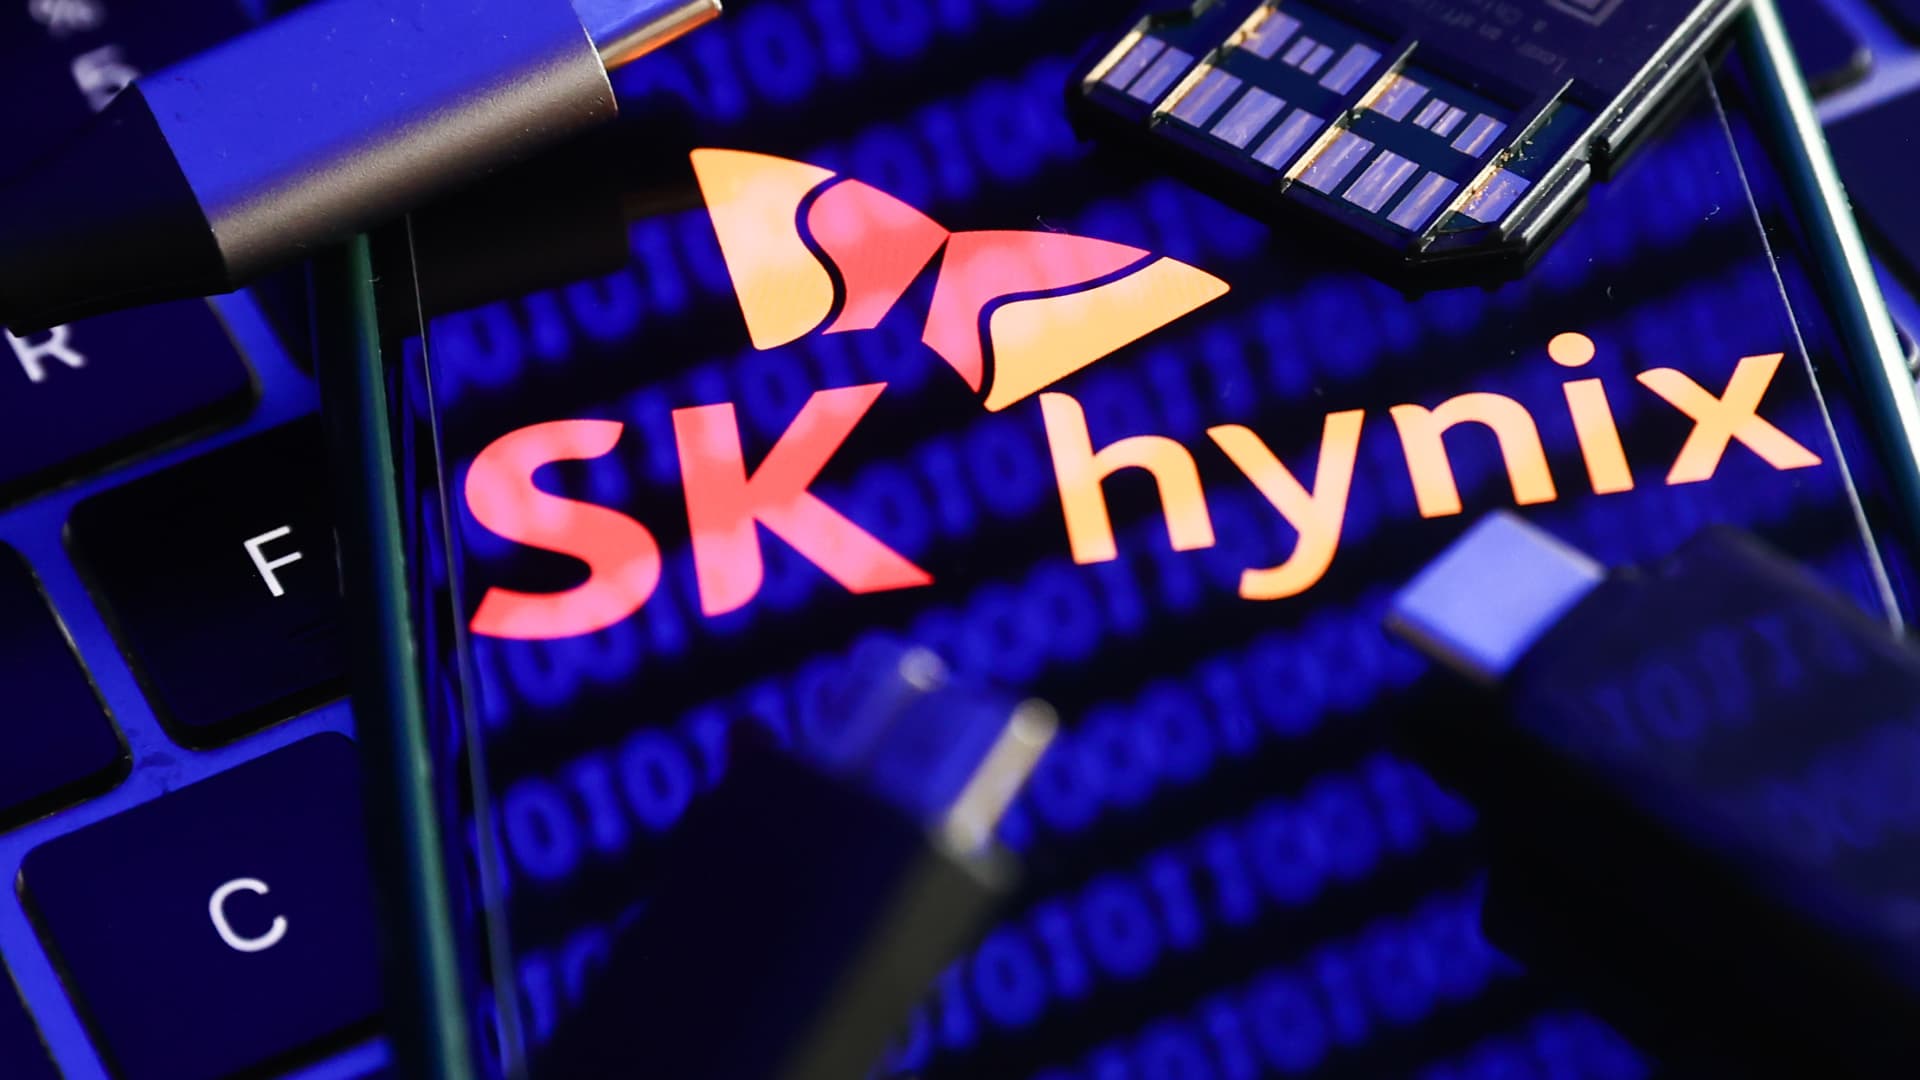 Nvidia supplier SK Hynix plans to invest $3.87 billion in U.S. chip facility